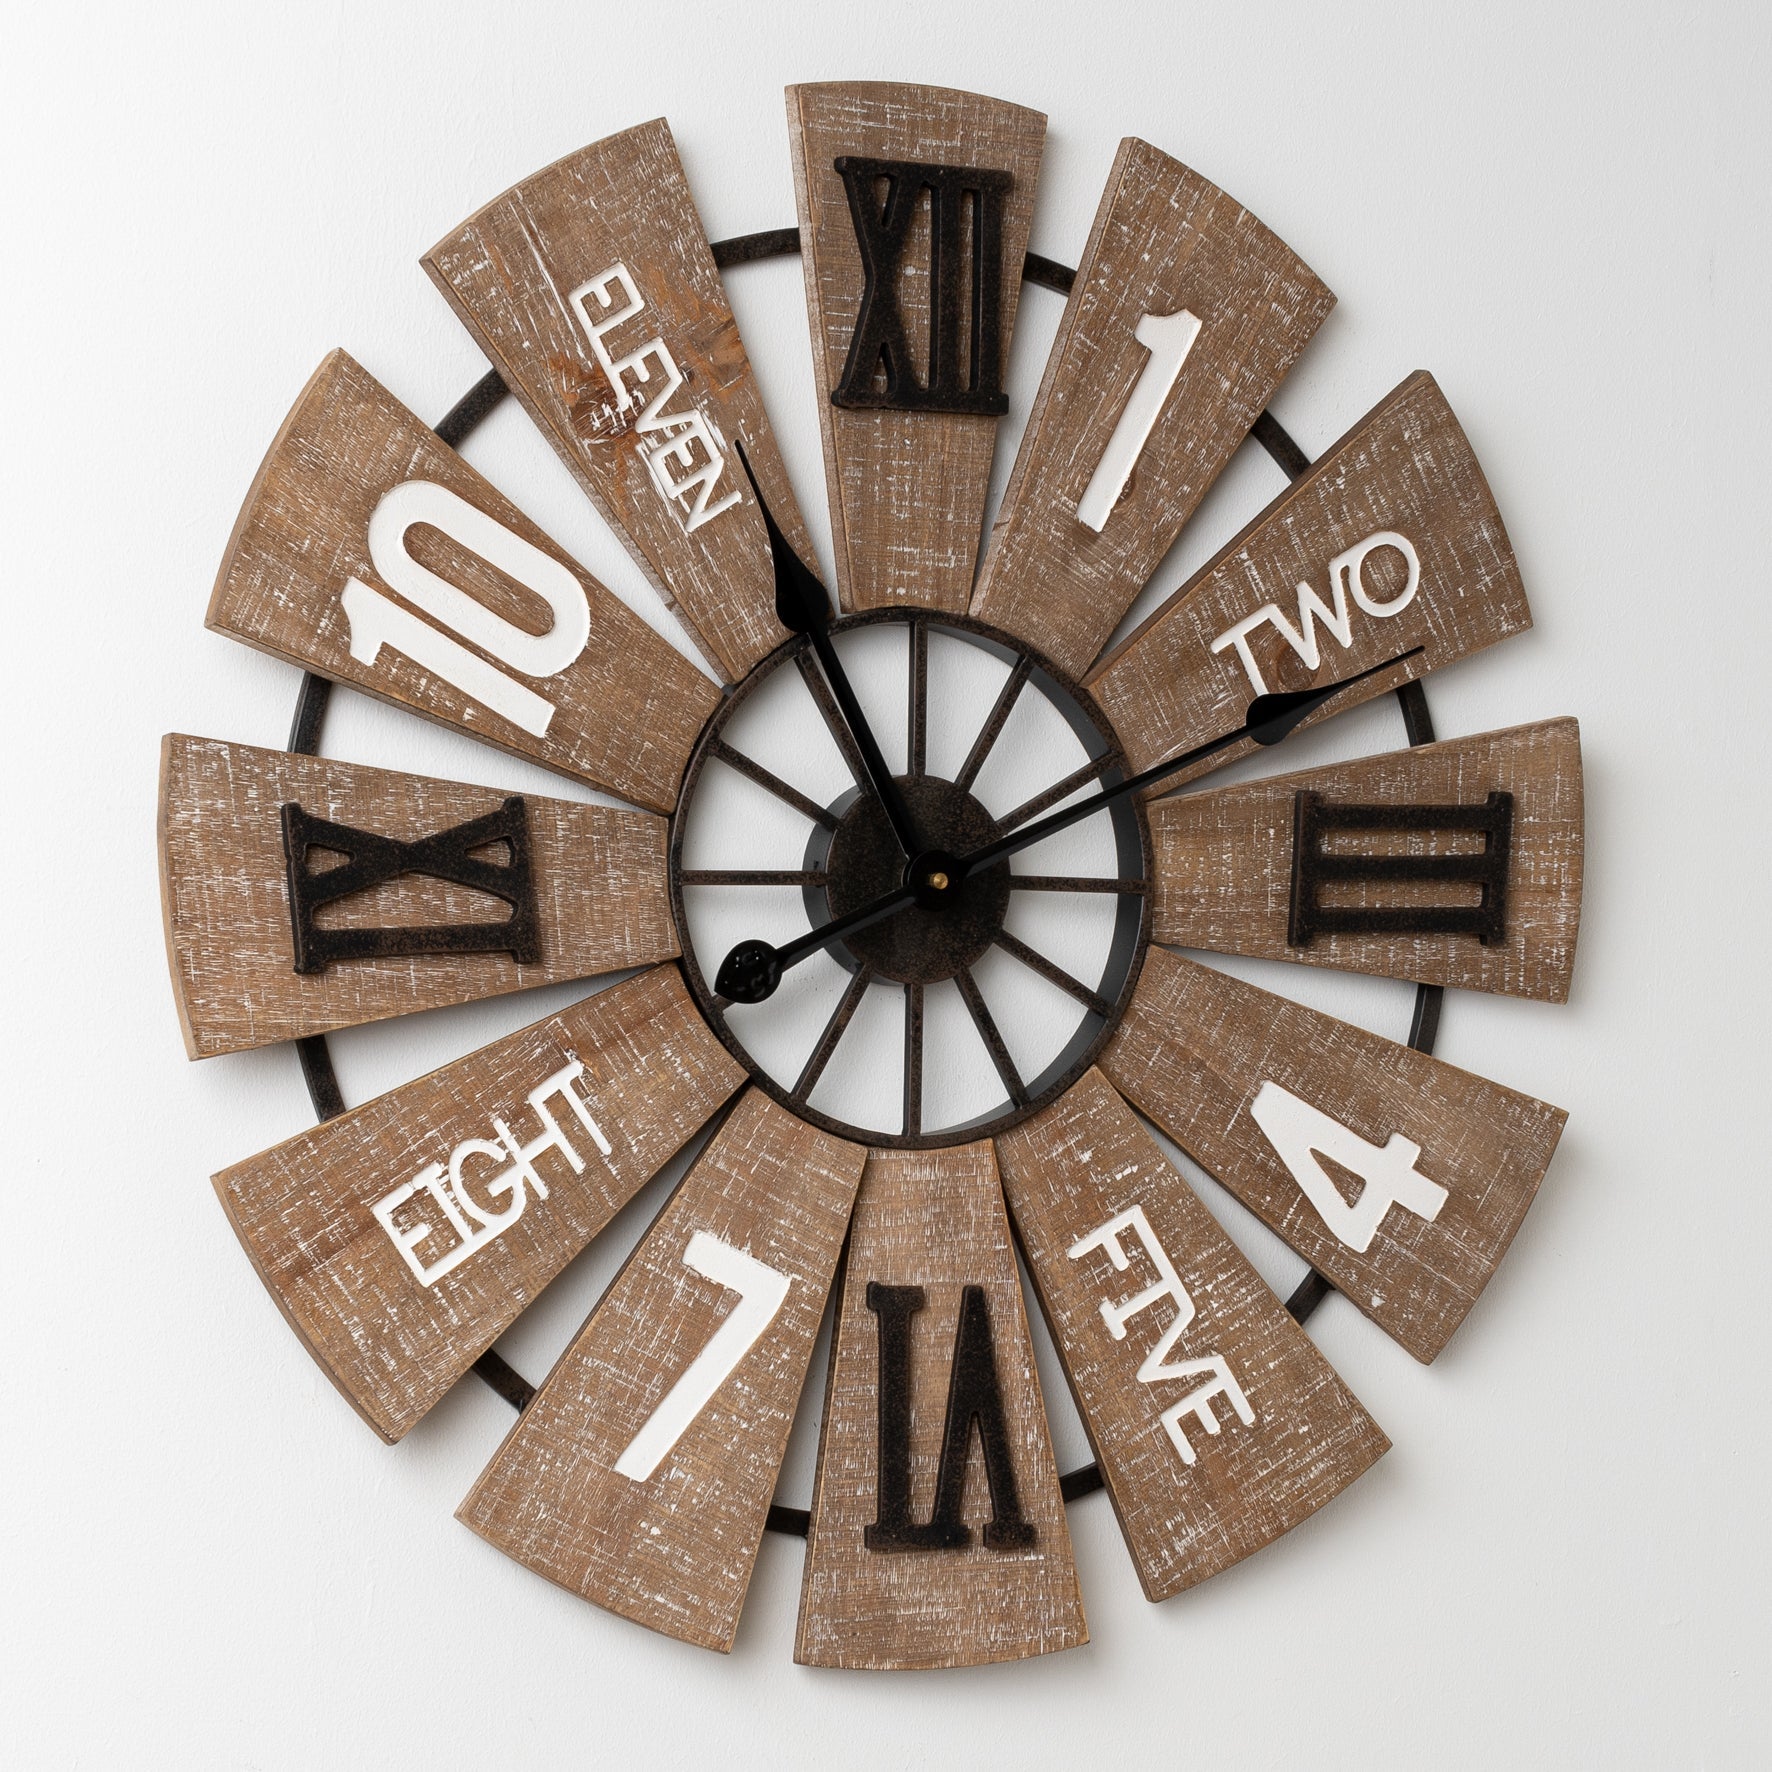 Hometime Metal and Wooden Wall Clock - Large 60cm